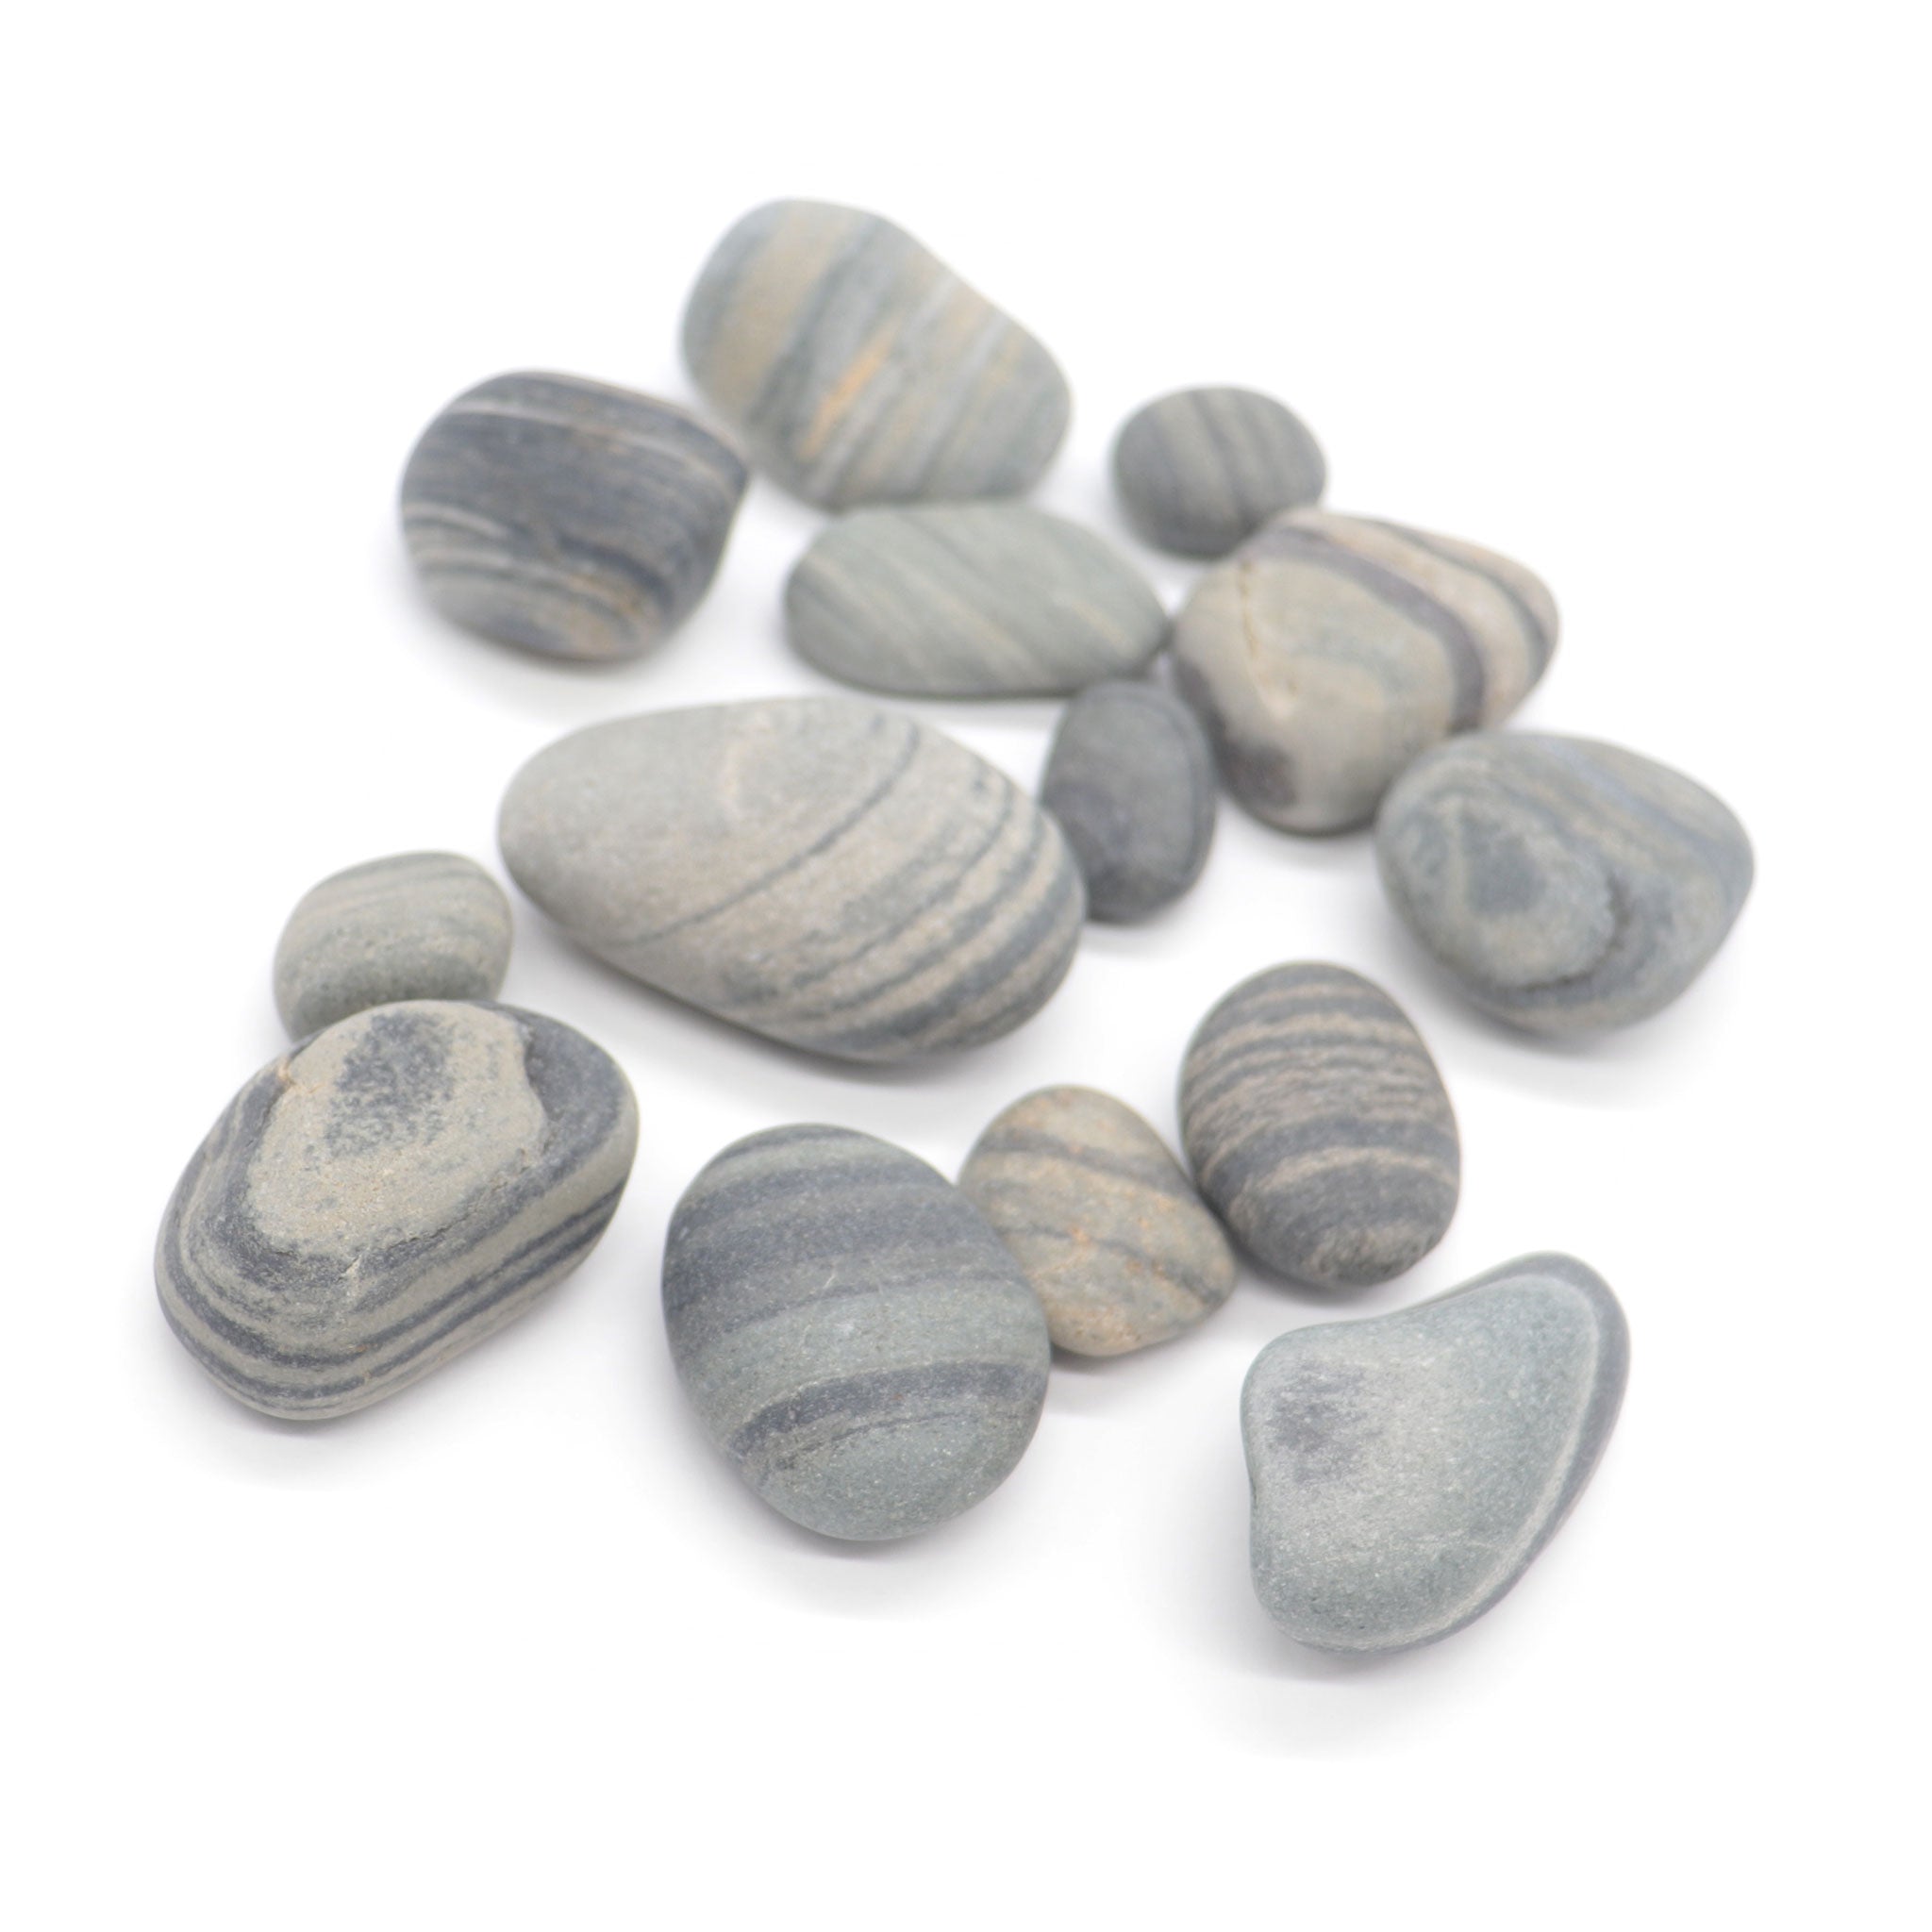 Banded Beach Luck Stone, 3 of - 13 Moons